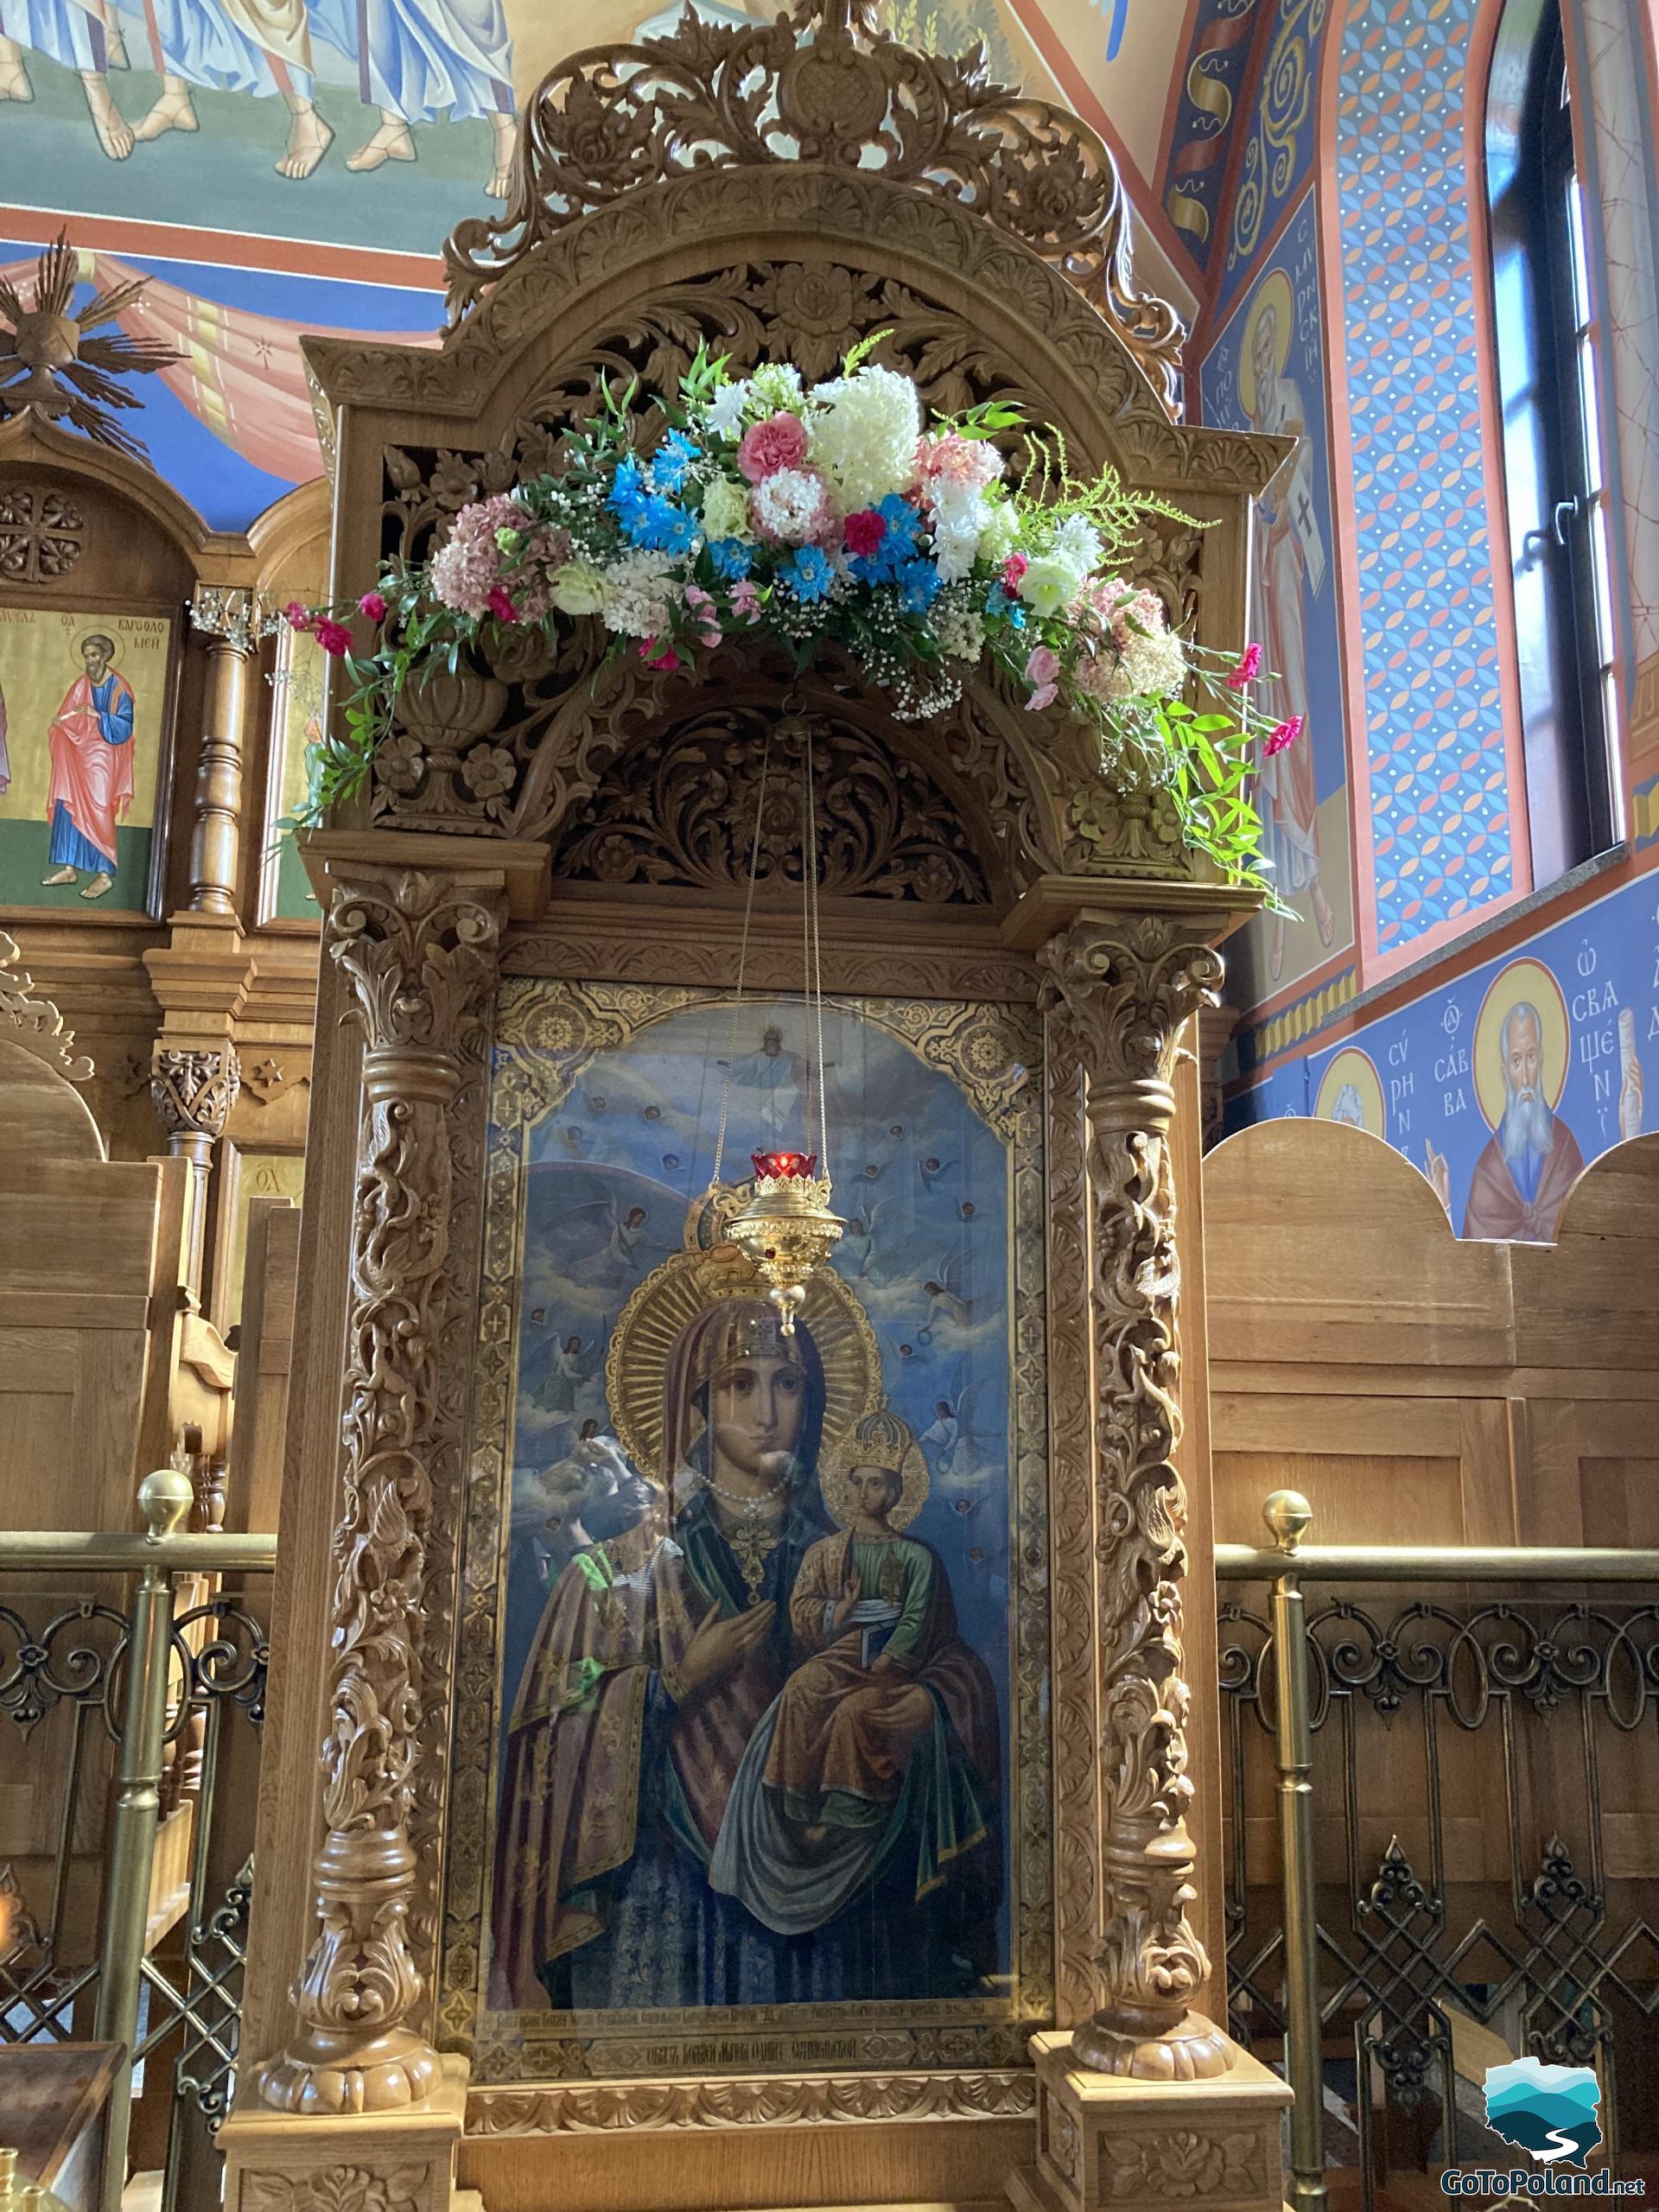 an image of the Mother of God behind glass, placed on a wooden altar